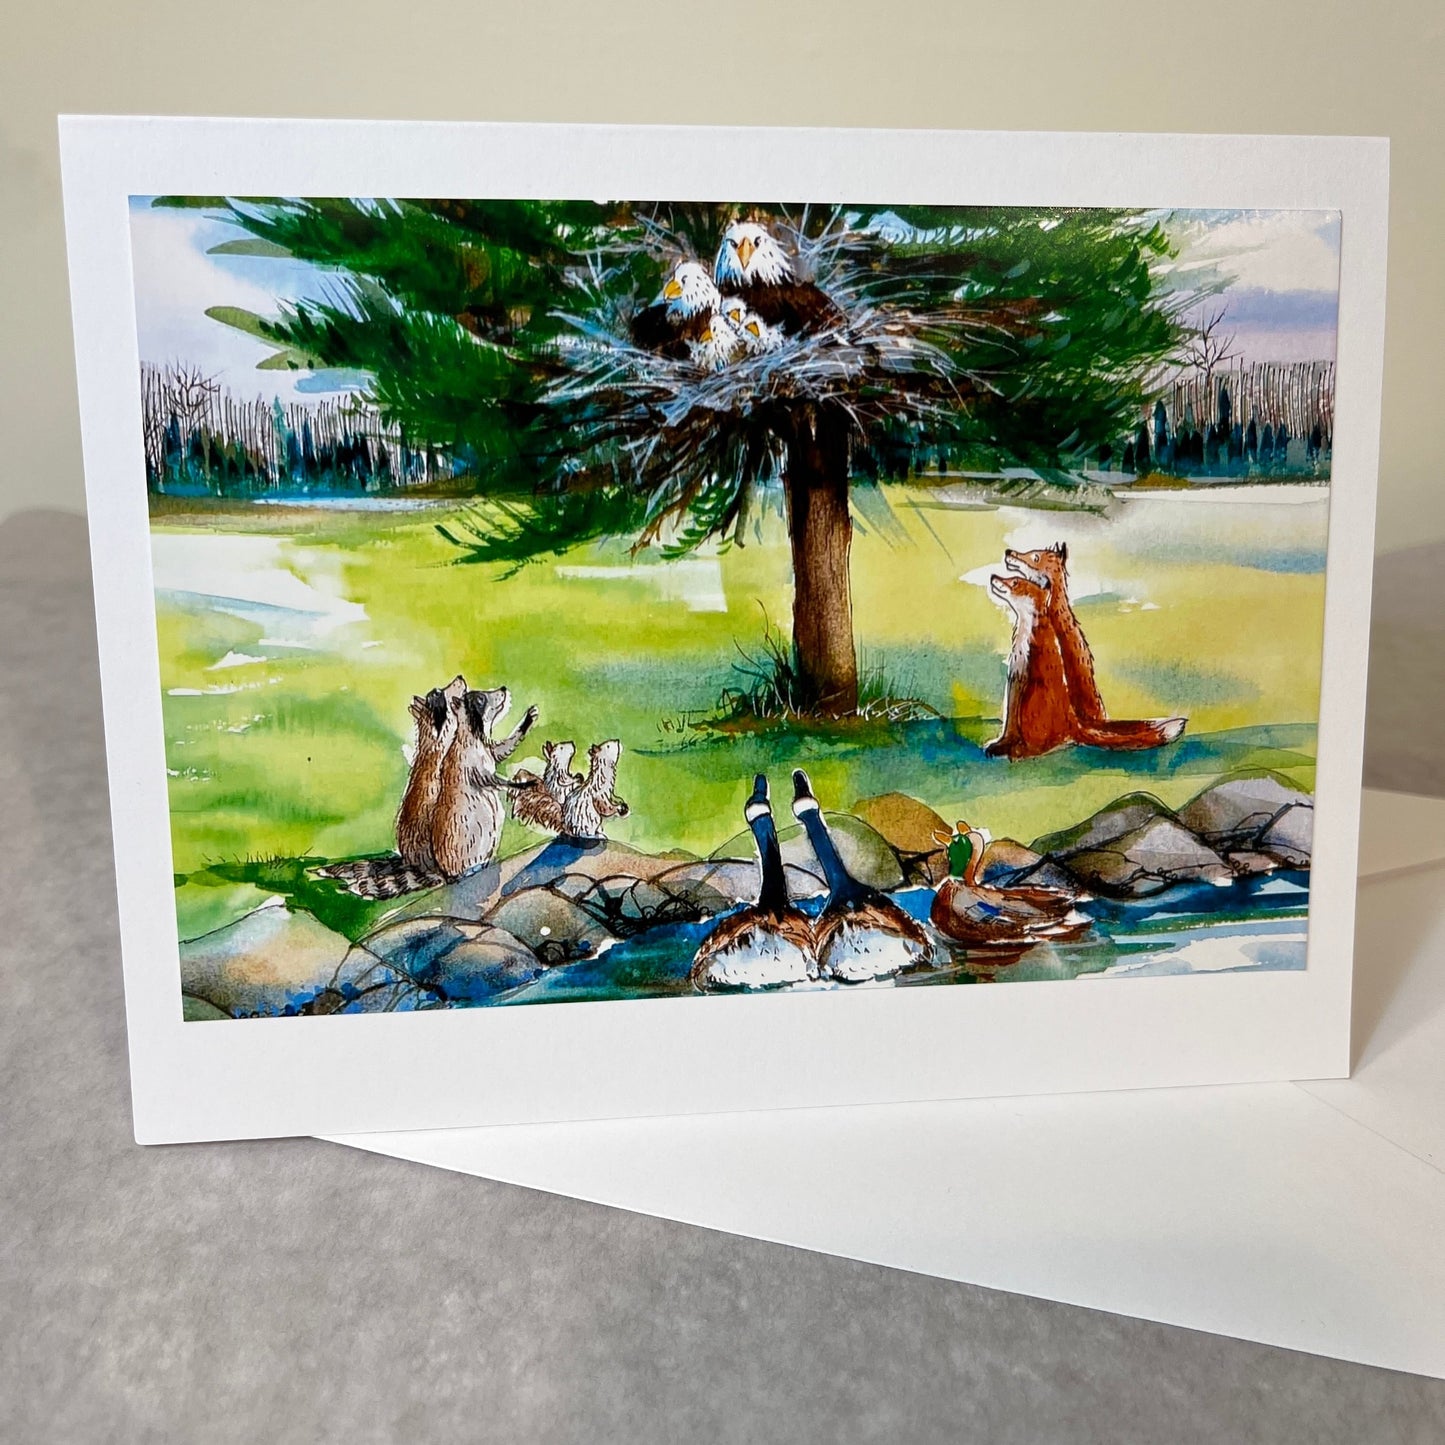 eagles story time with animals gathered photo note card with envelope illustration from Hop Onward Rabbit Rabbit book